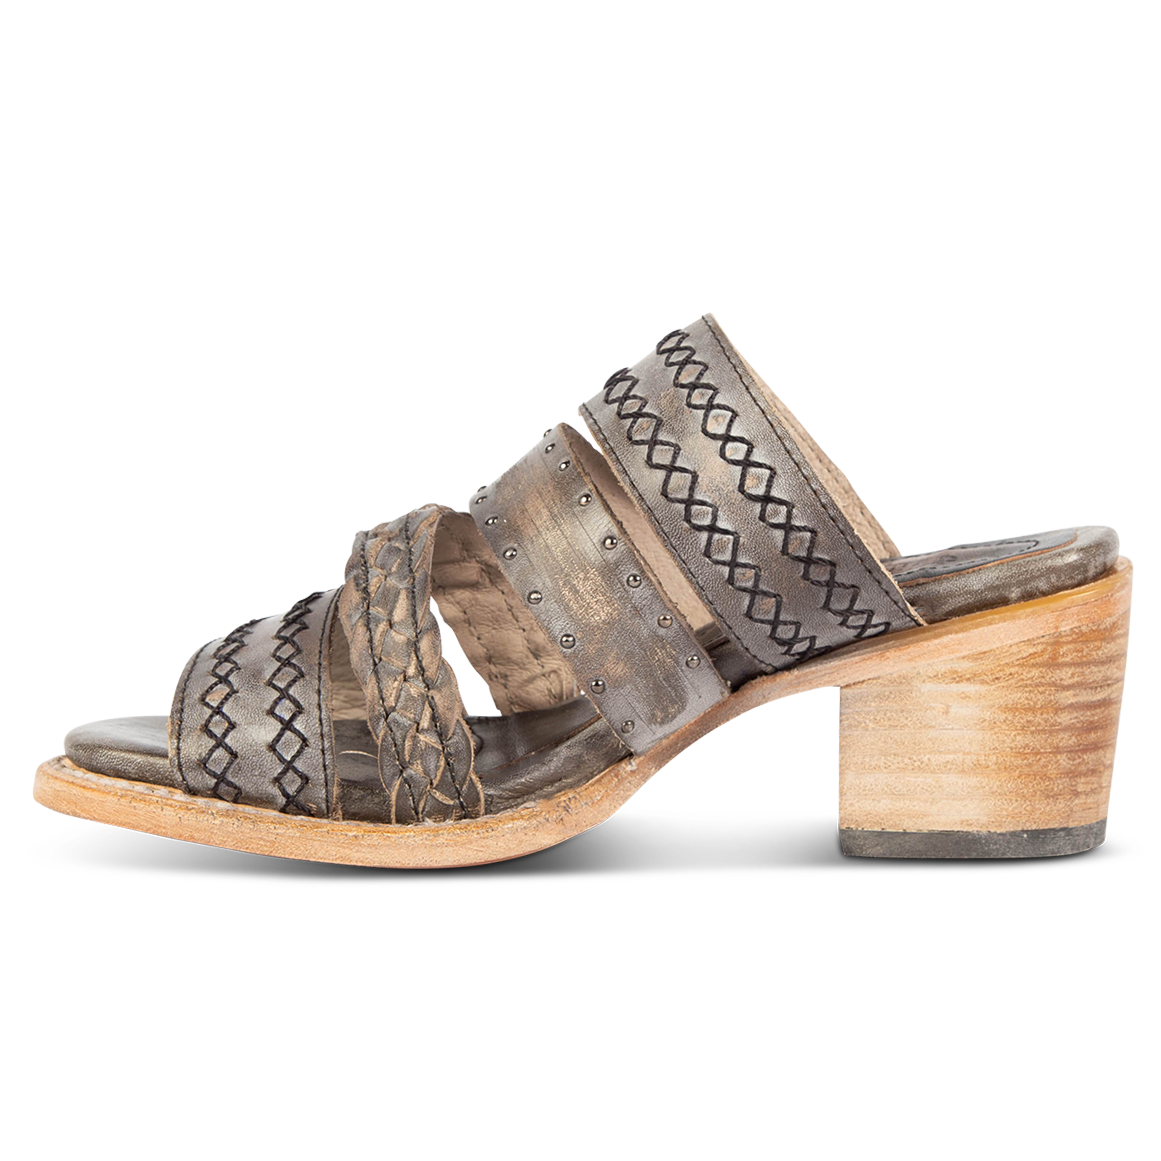 Inside view view showing braided and stitch detailed straps on FREEBIRD women's Albuquerque ice open-toe slip-on sandal